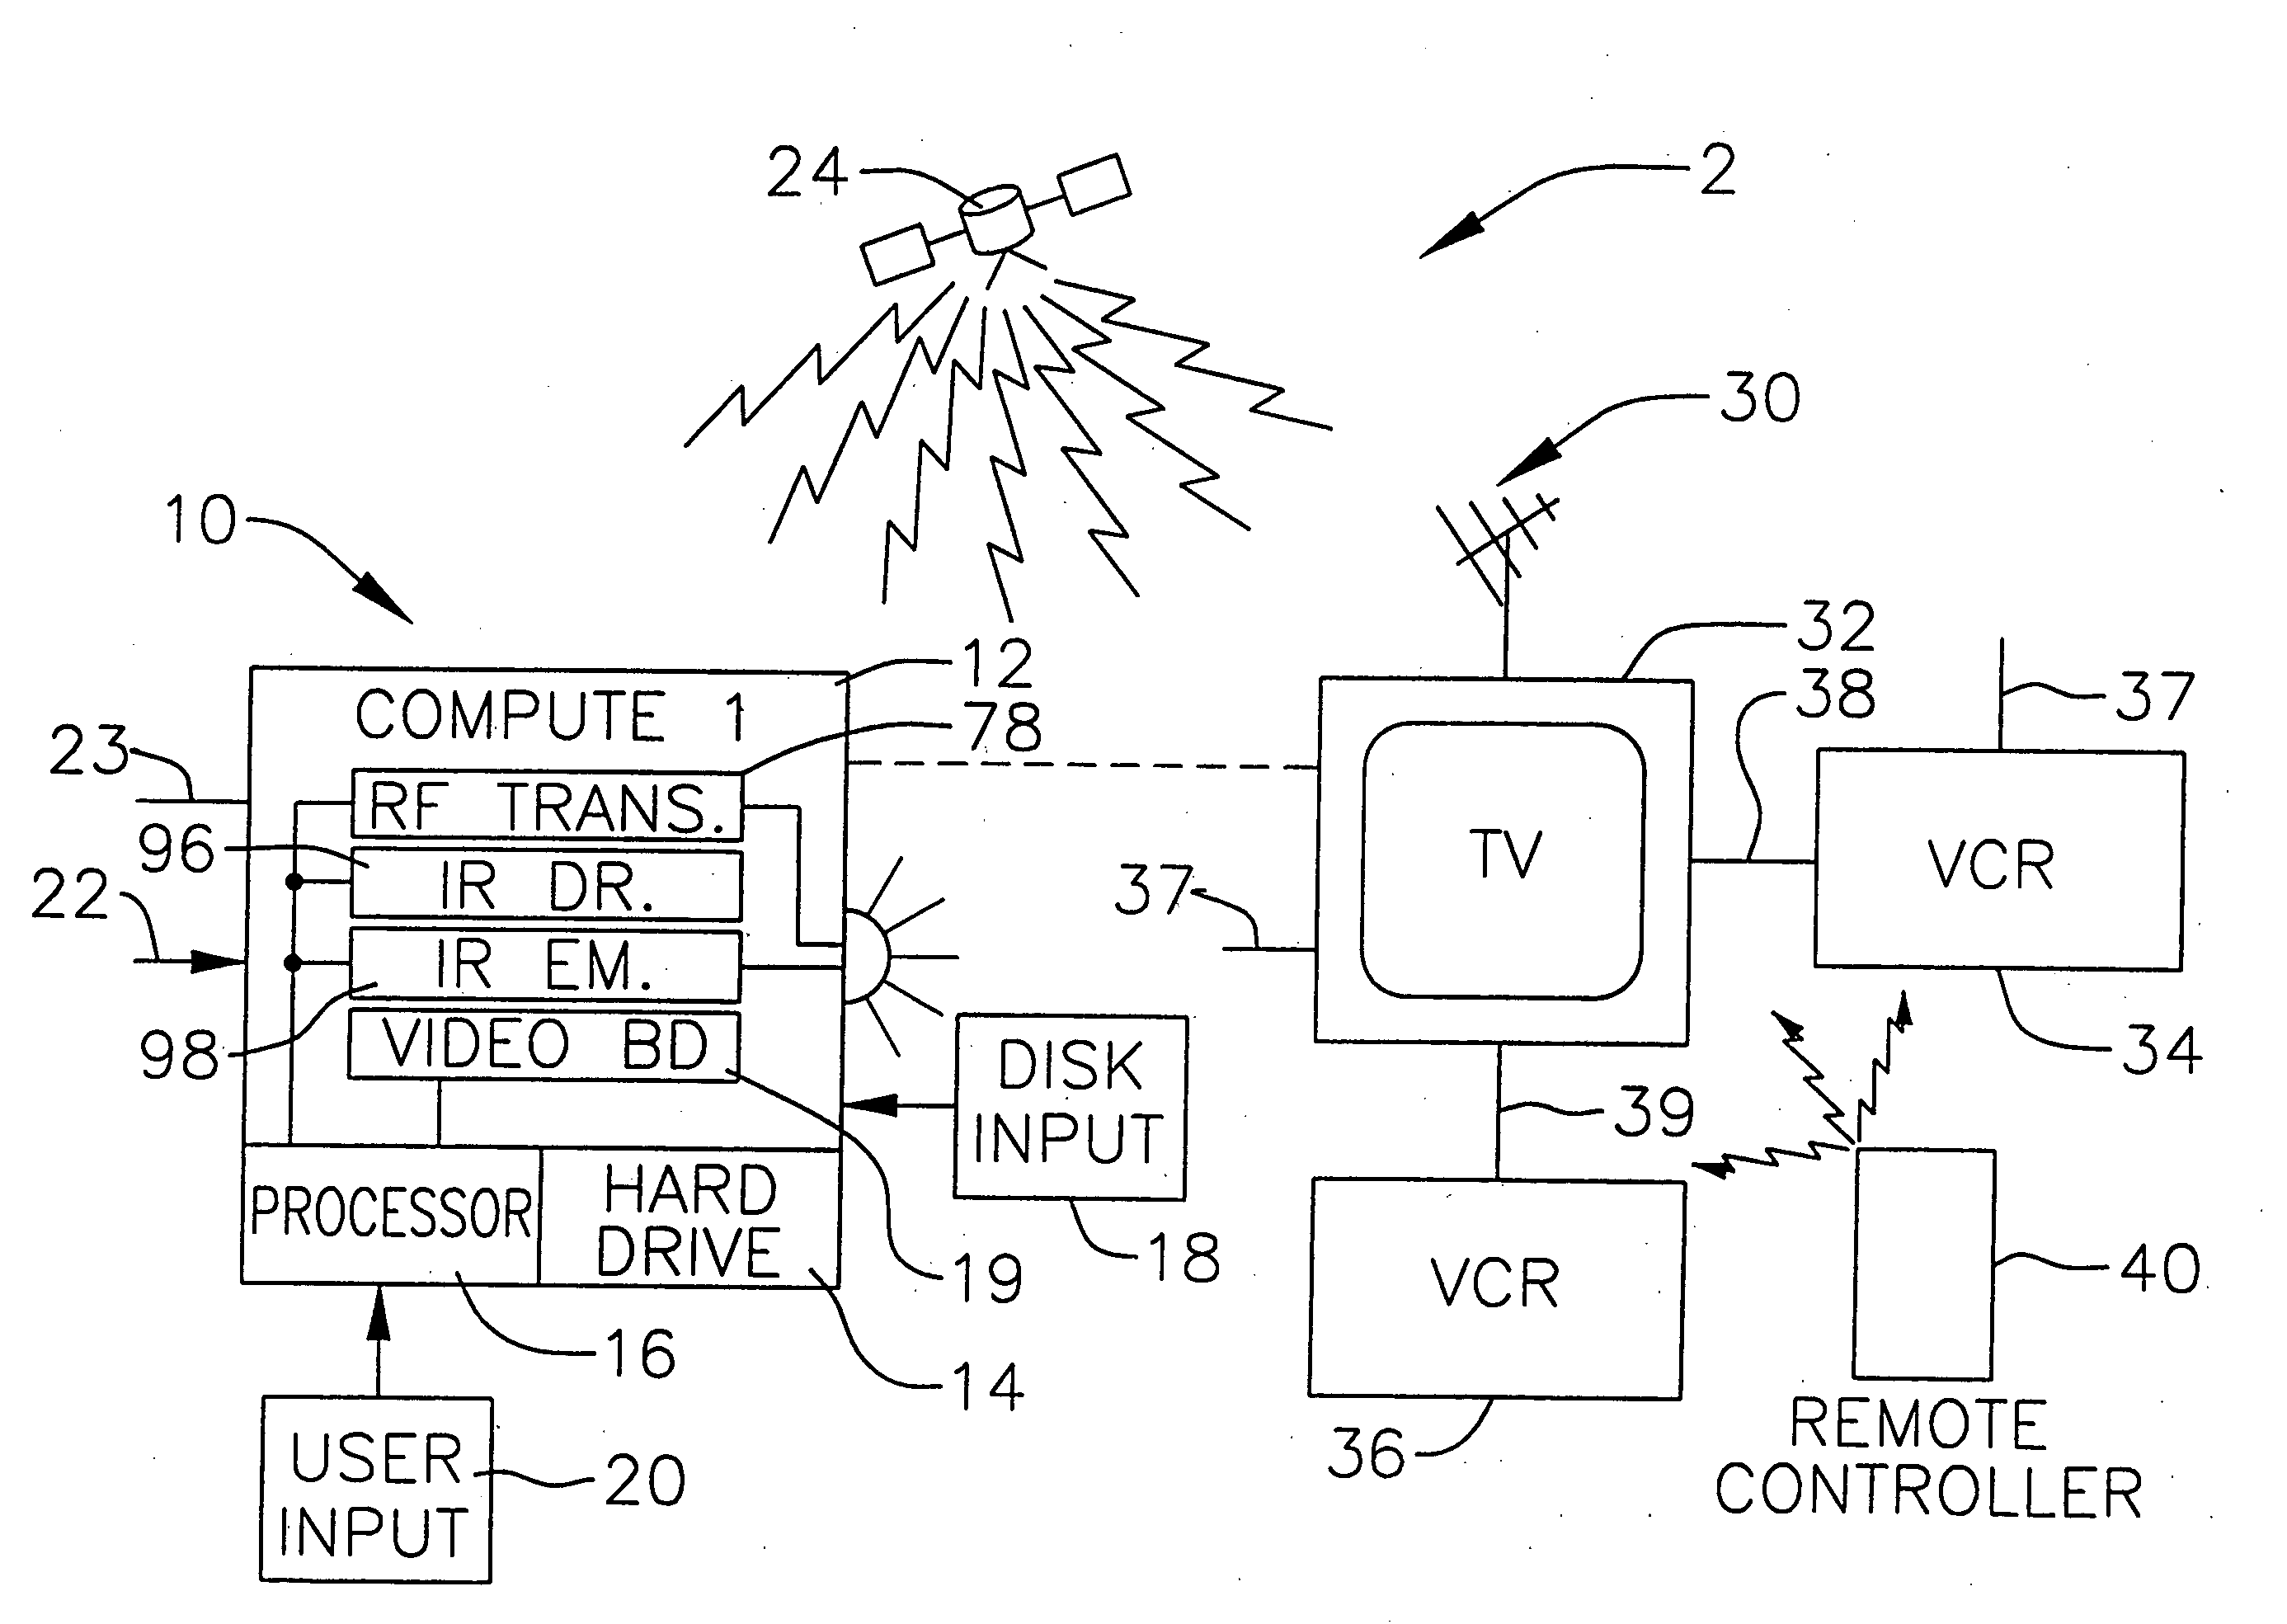 System and methods for linking television viewers with advertisers and broadcasters